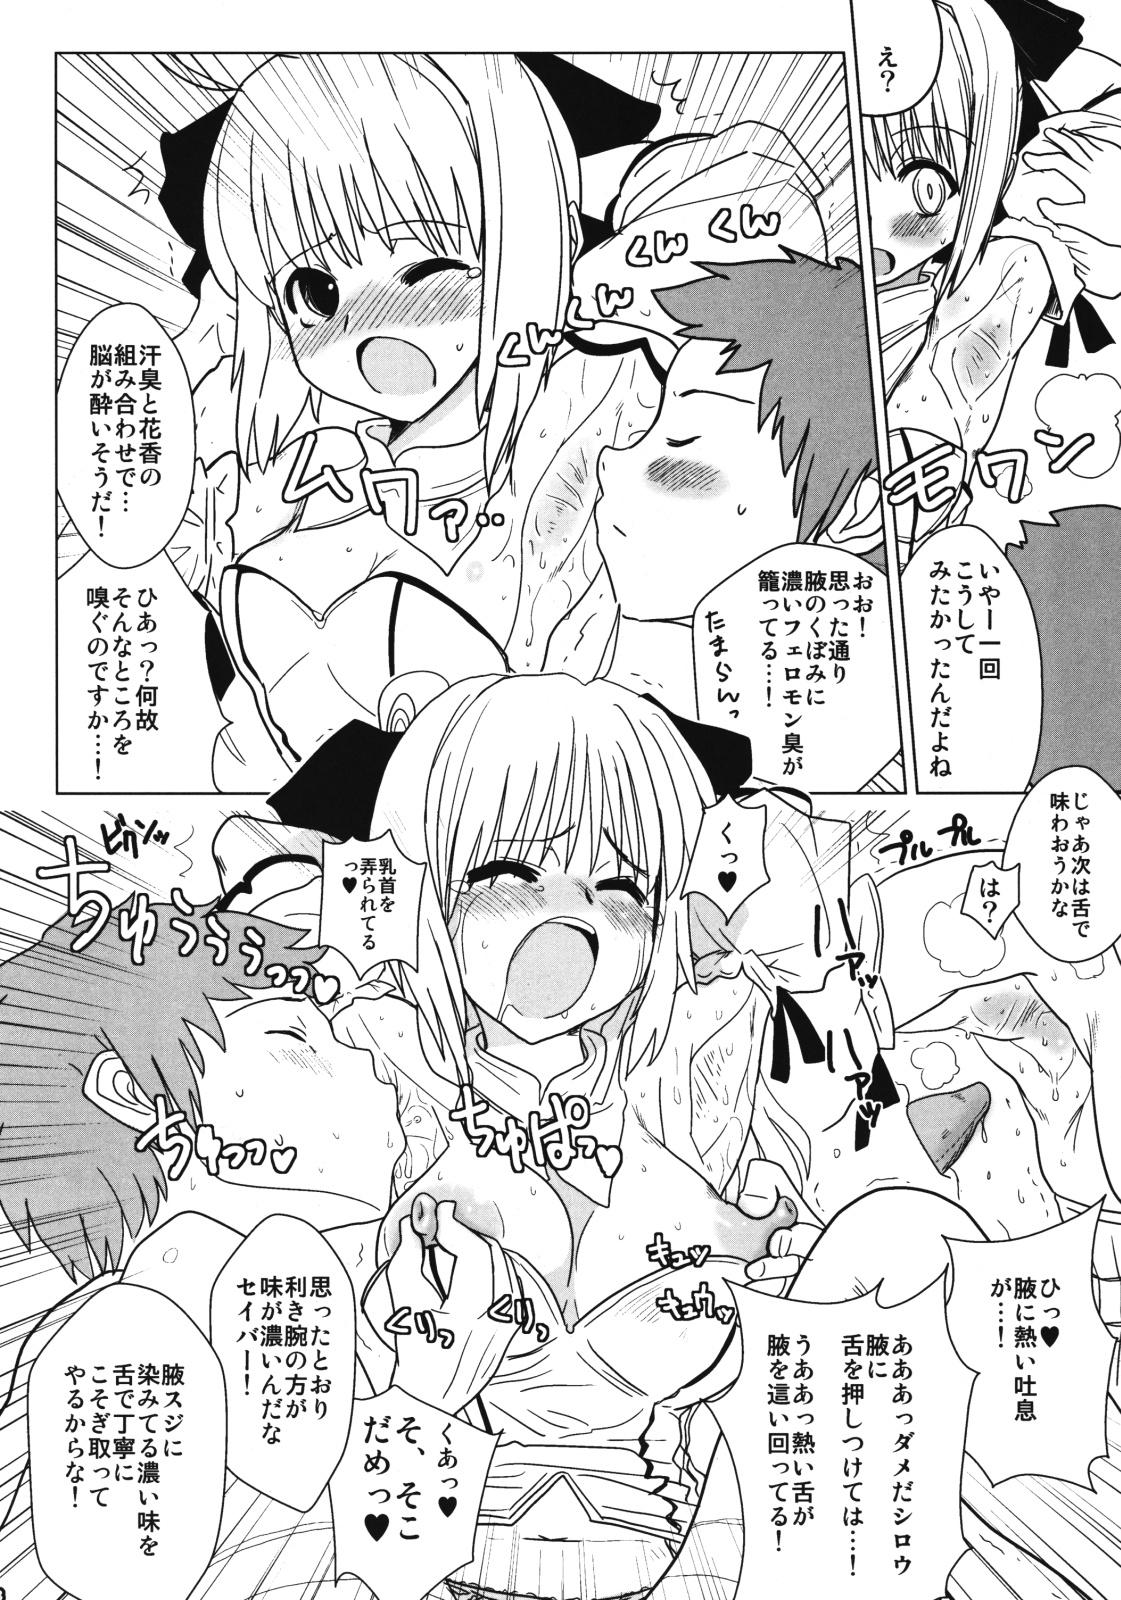 Adult Toys Lily Holic no Subete - Fate stay night Two - Page 7